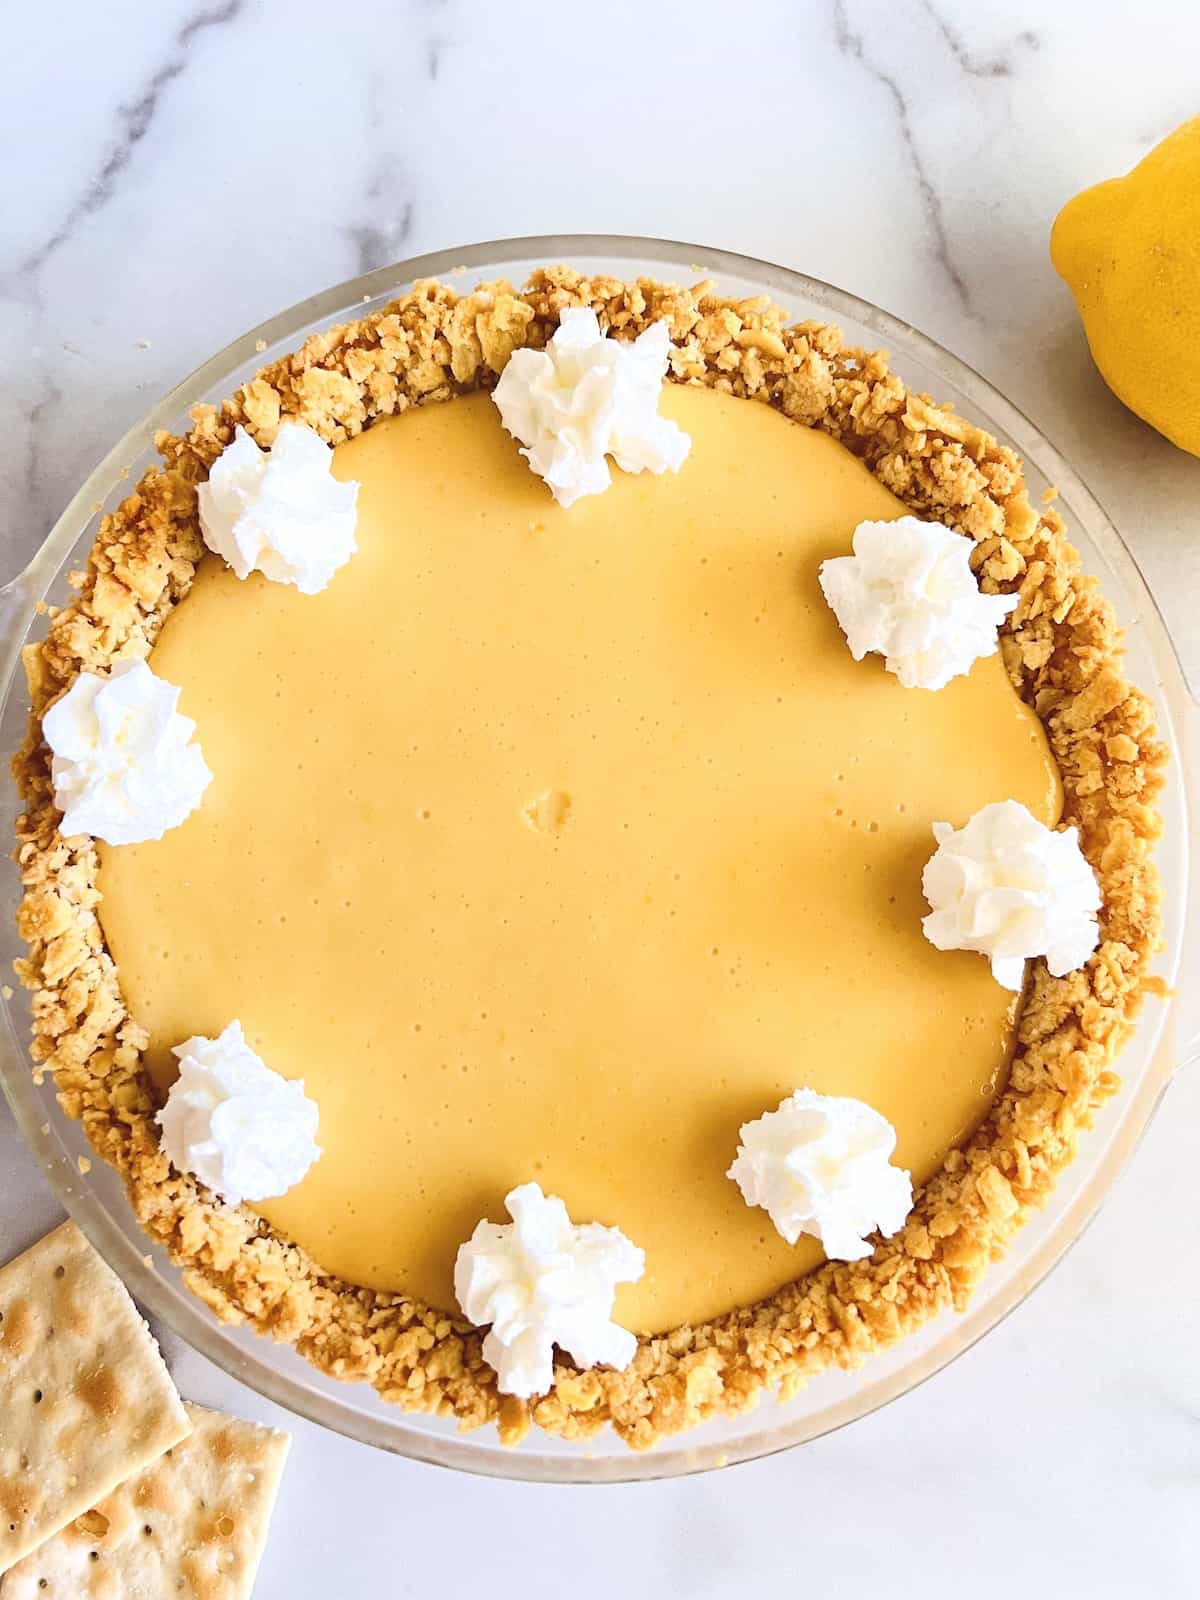 North Carolina Lemon Pie with dollops of whipped cream on top.